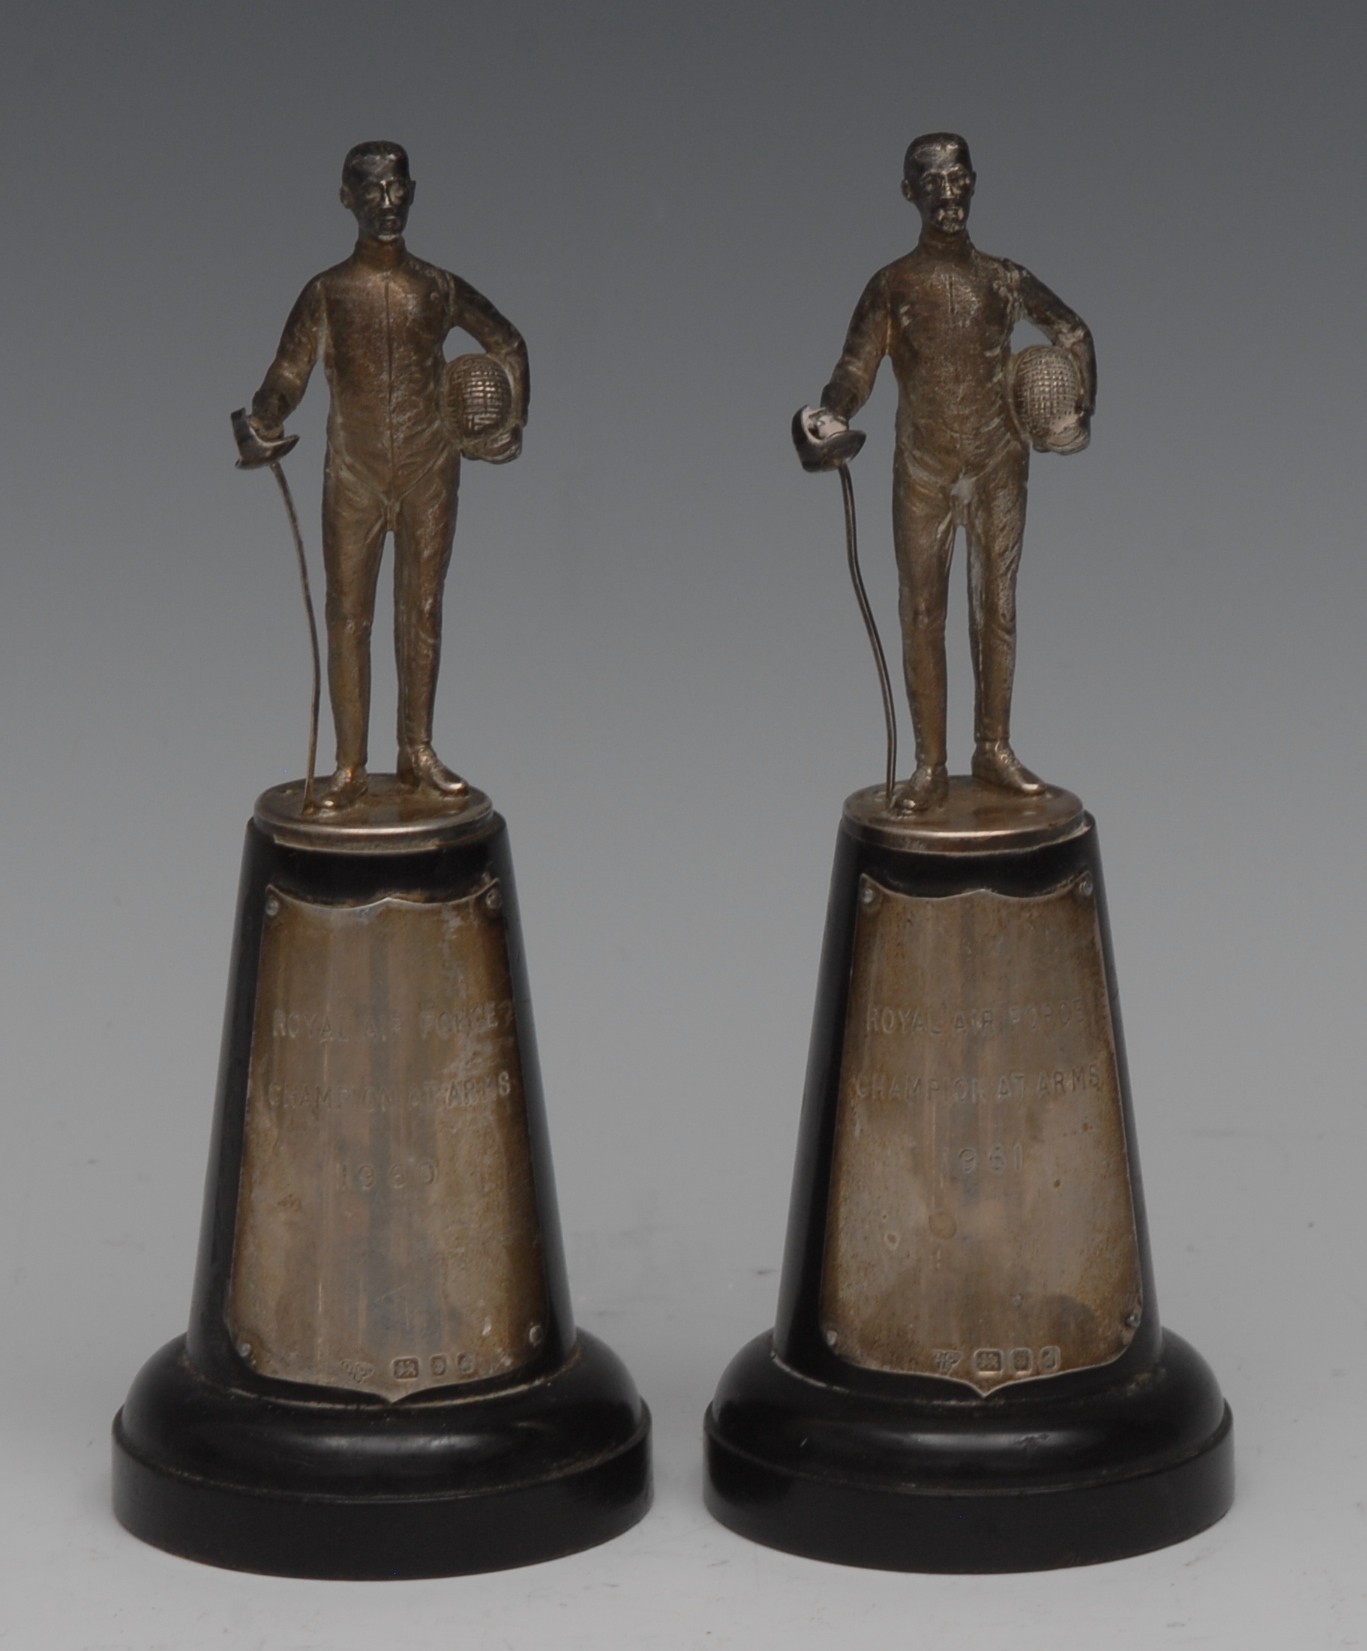 Fencing - a pair of Elizabeth II silver figures, cast as combatants with mask and foil,